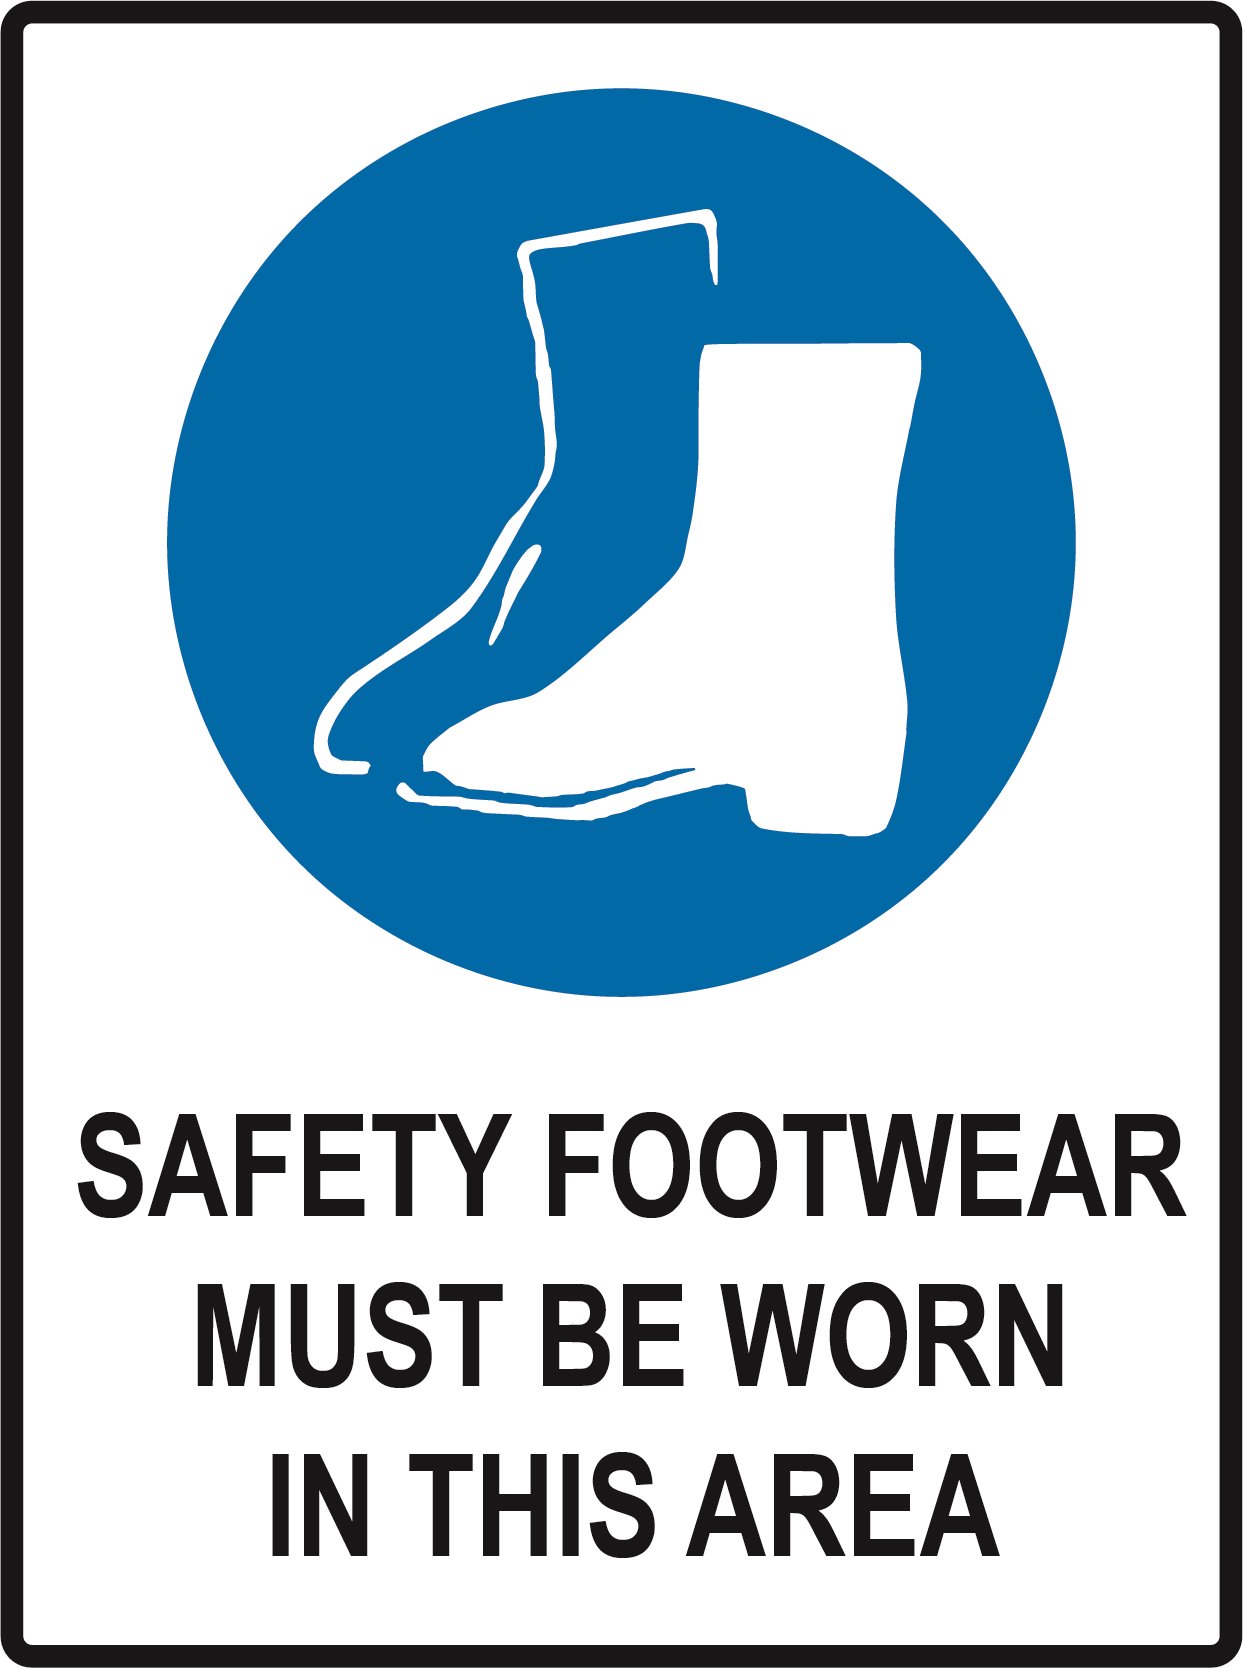 Safety Footwear Must Be Worn in this Area